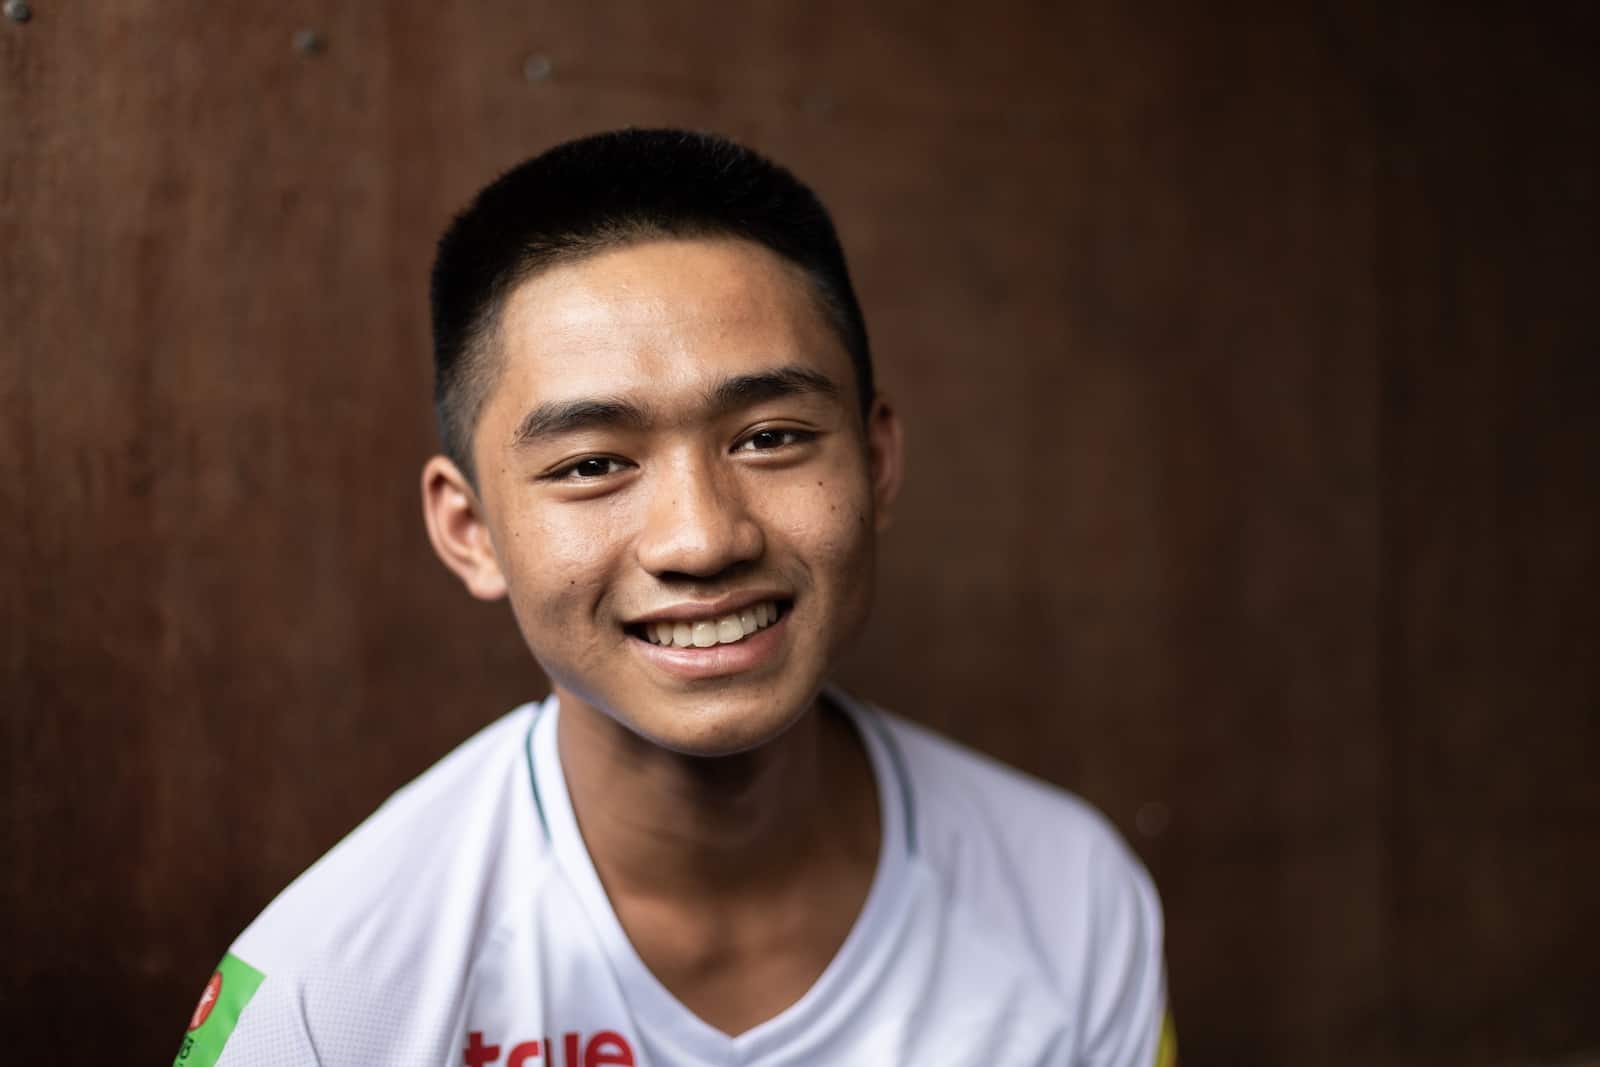 A teenage boy, Adun who was part of the Thailand cave rescue, wears a white shirt smiles at the camera. He sits in front of a brown background. 